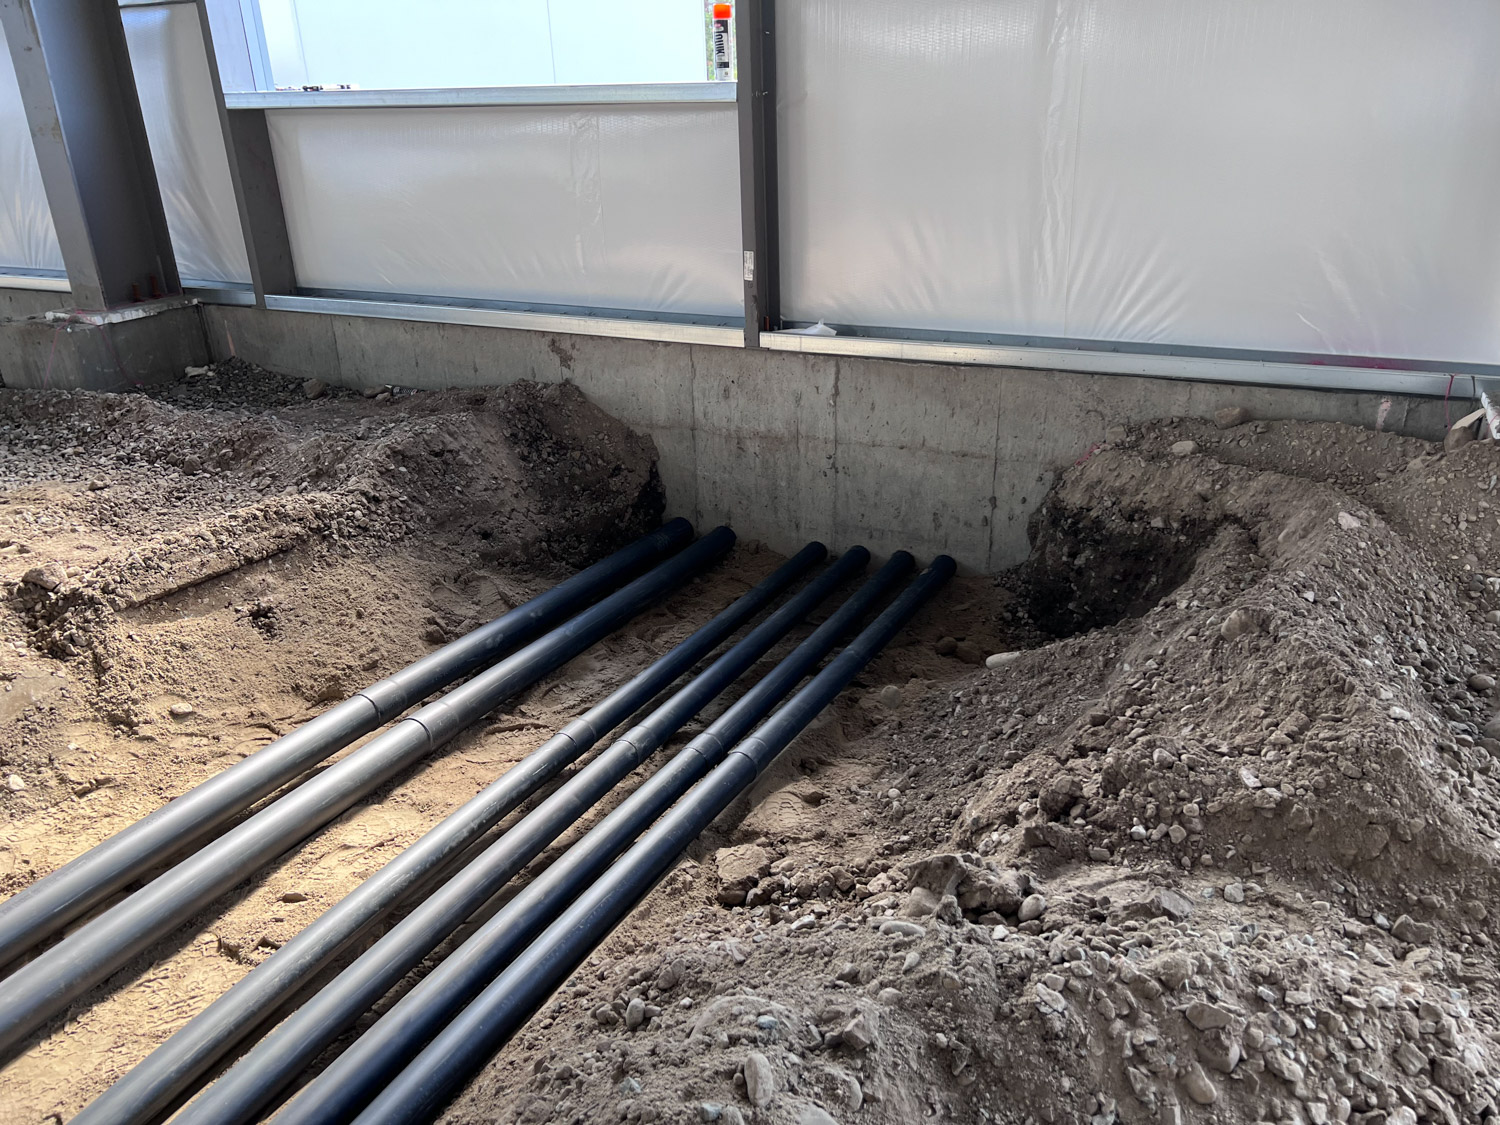 Underground electrical pipes in an Okanagan commercial business